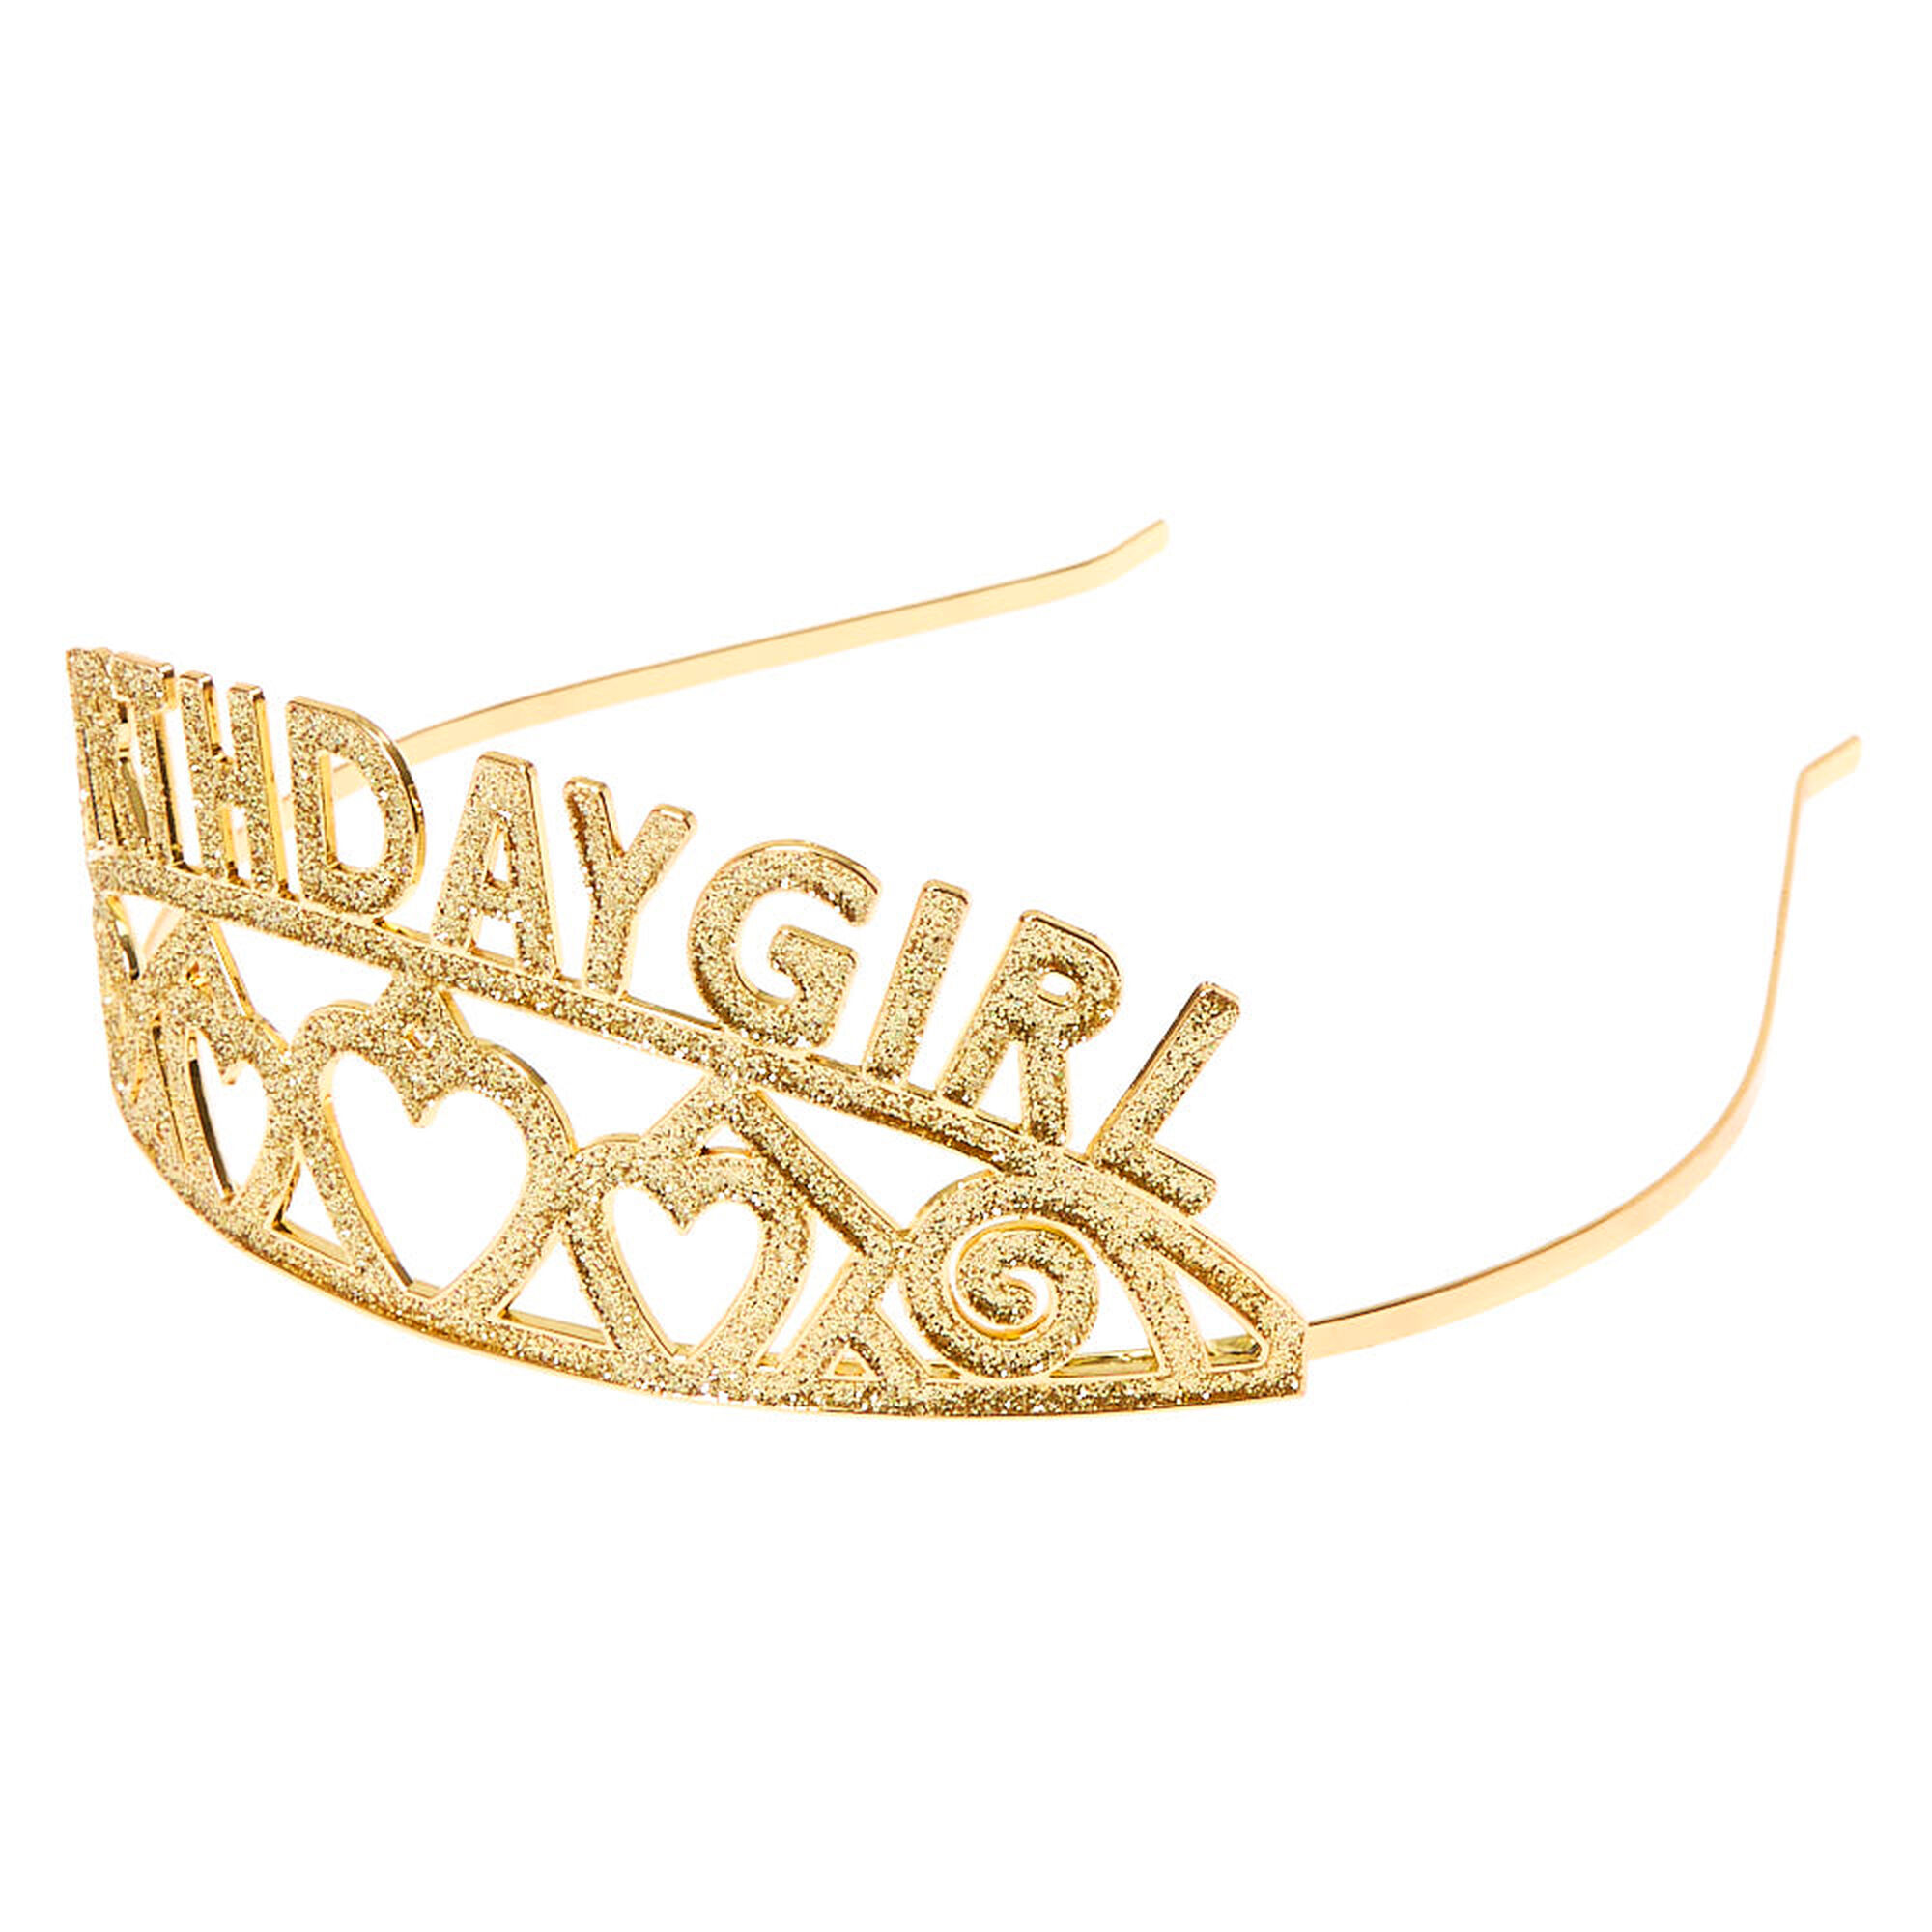 View Claires Birthday Girl Glitter Tiara Gold information